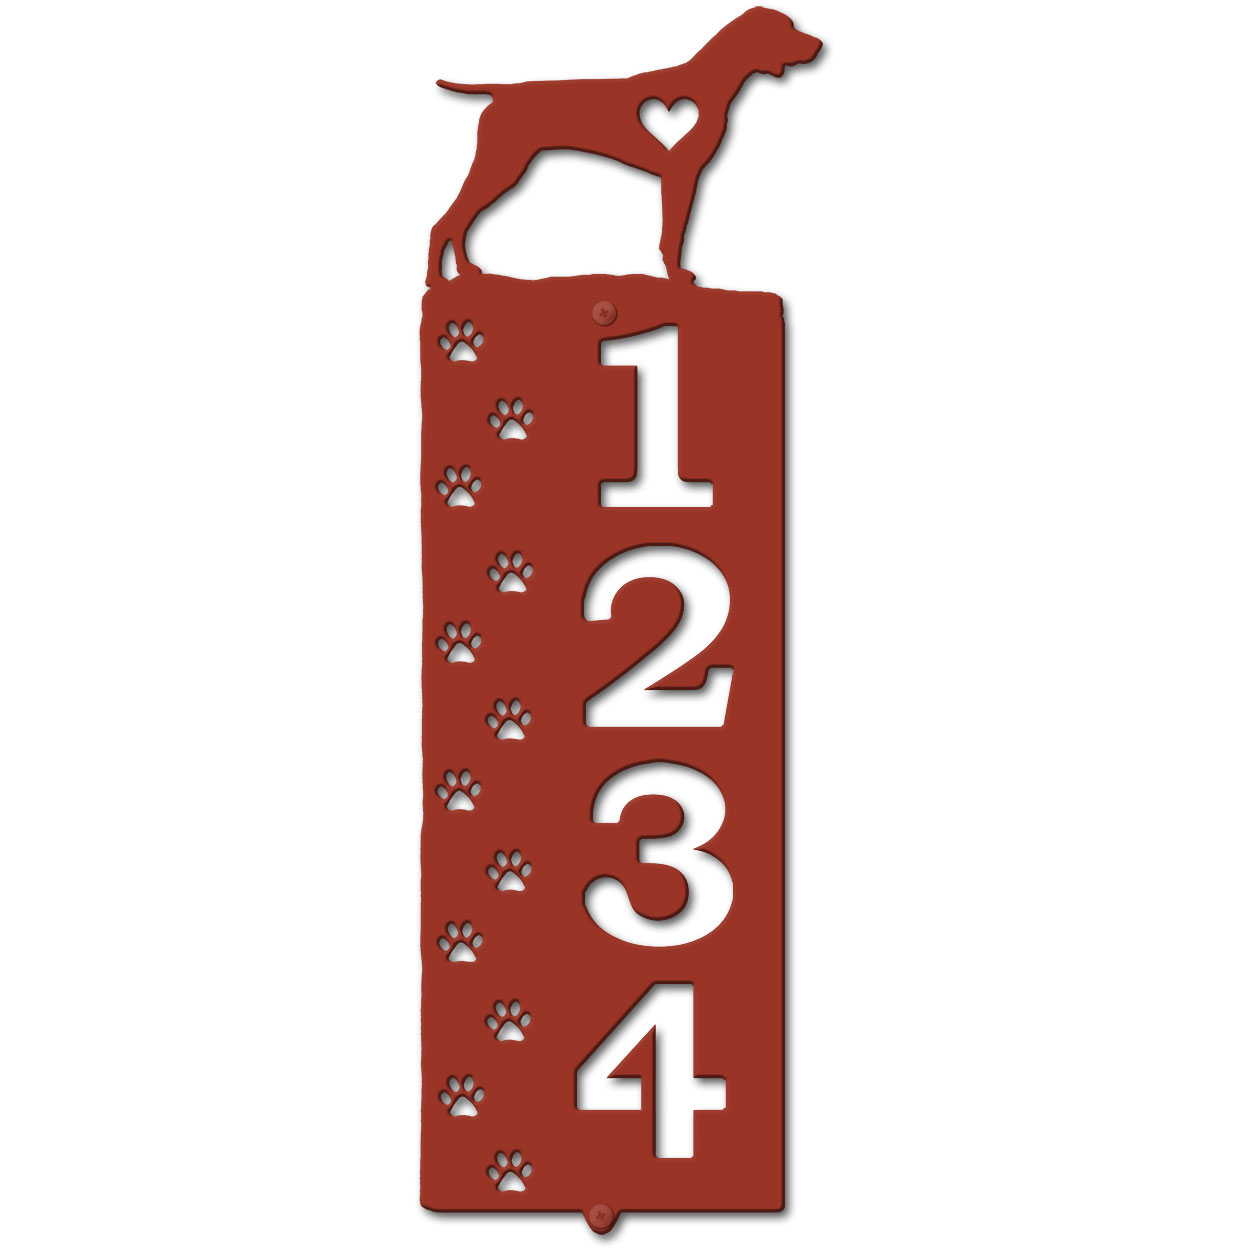 636284 - Pointer Cut Outs Four Digit Address Number Plaque